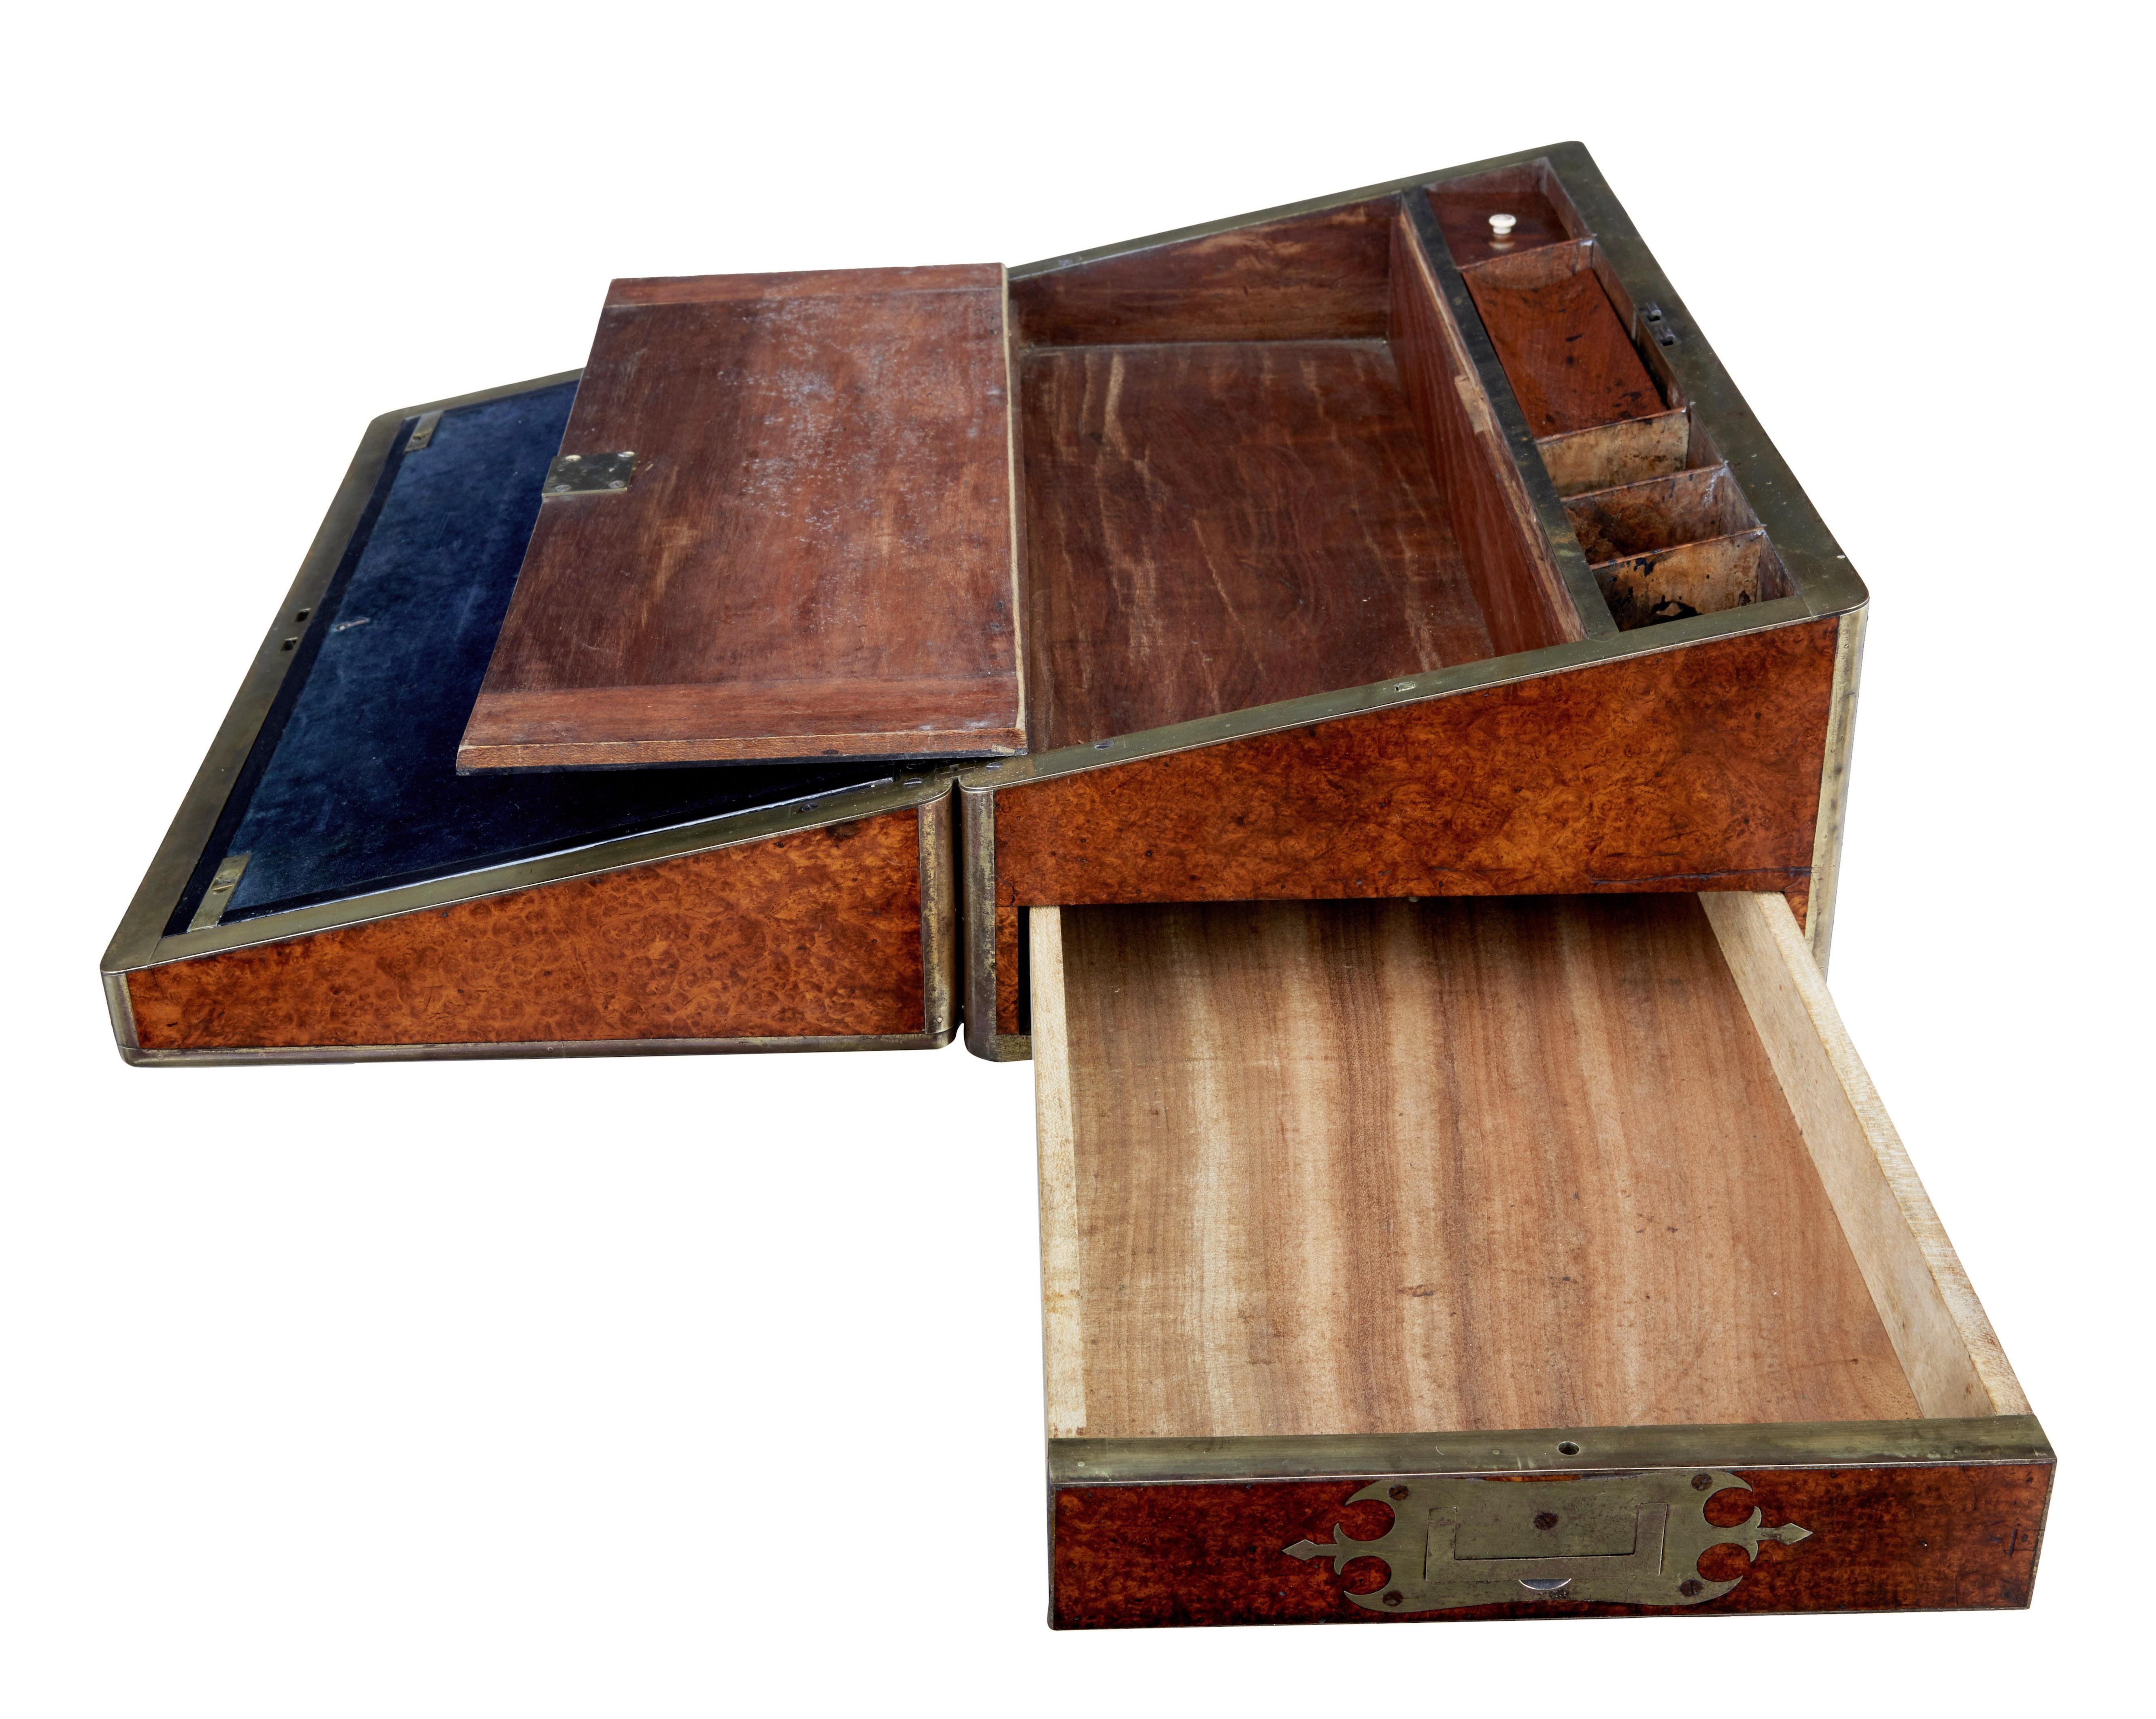 Mid 19th century burr campaign lap desk circa 1860.

Good quality burr writing box.

Beautifully brass bound outside and inside edging. Stunning burr wood exterior. Original dark blue velvet writing surface which splits both ways to reveal storage.